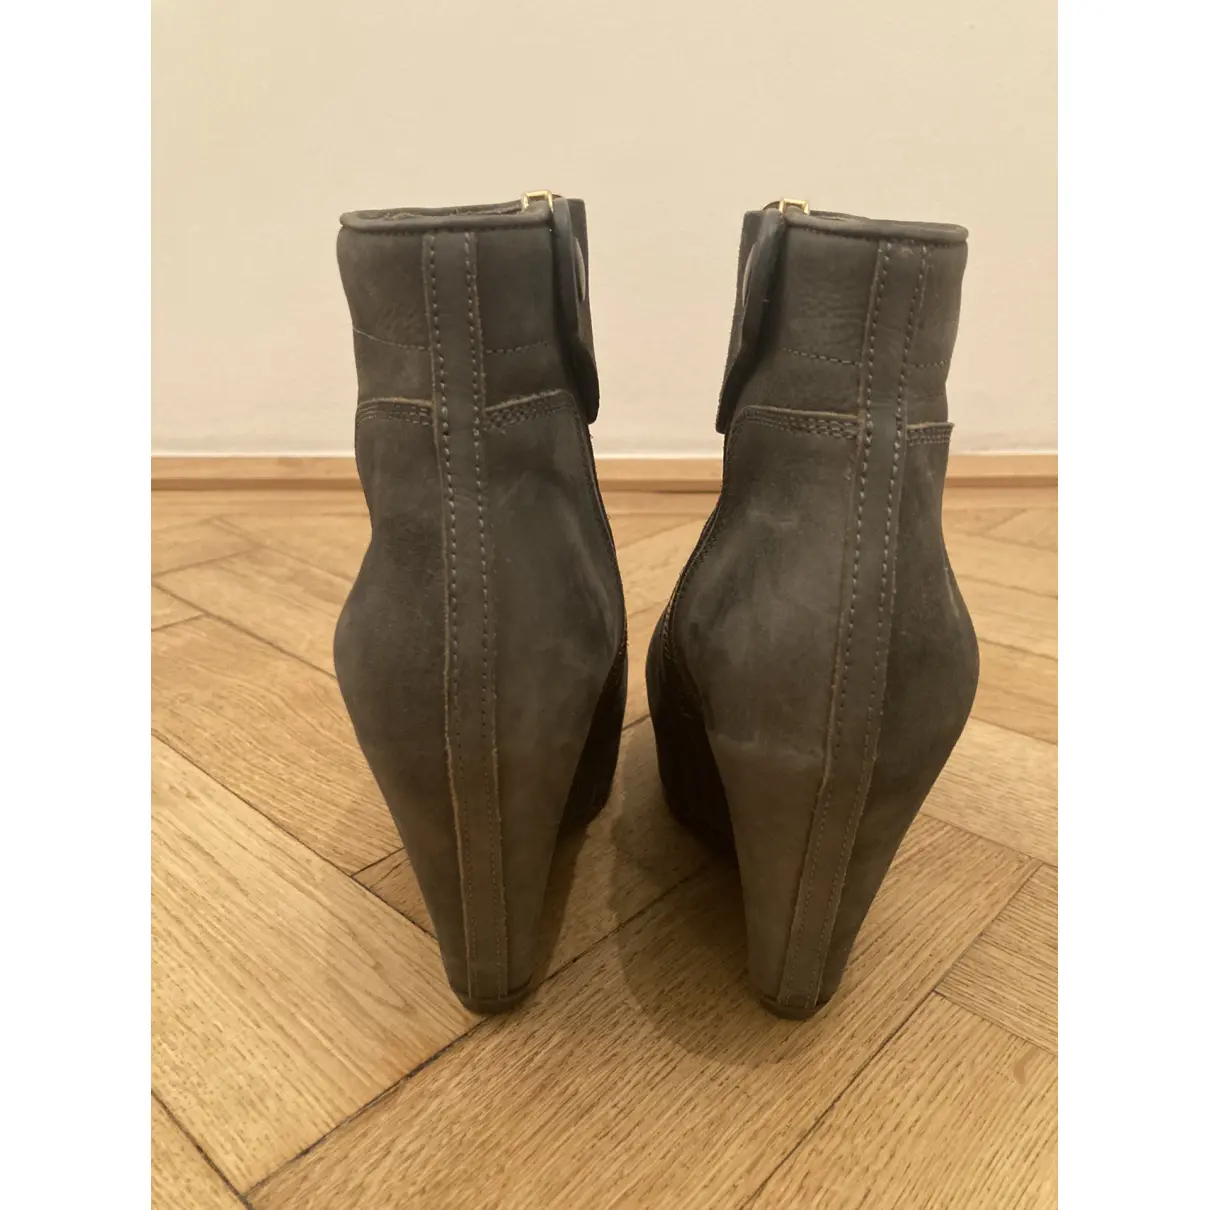 Buy Rick Owens Ankle boots online